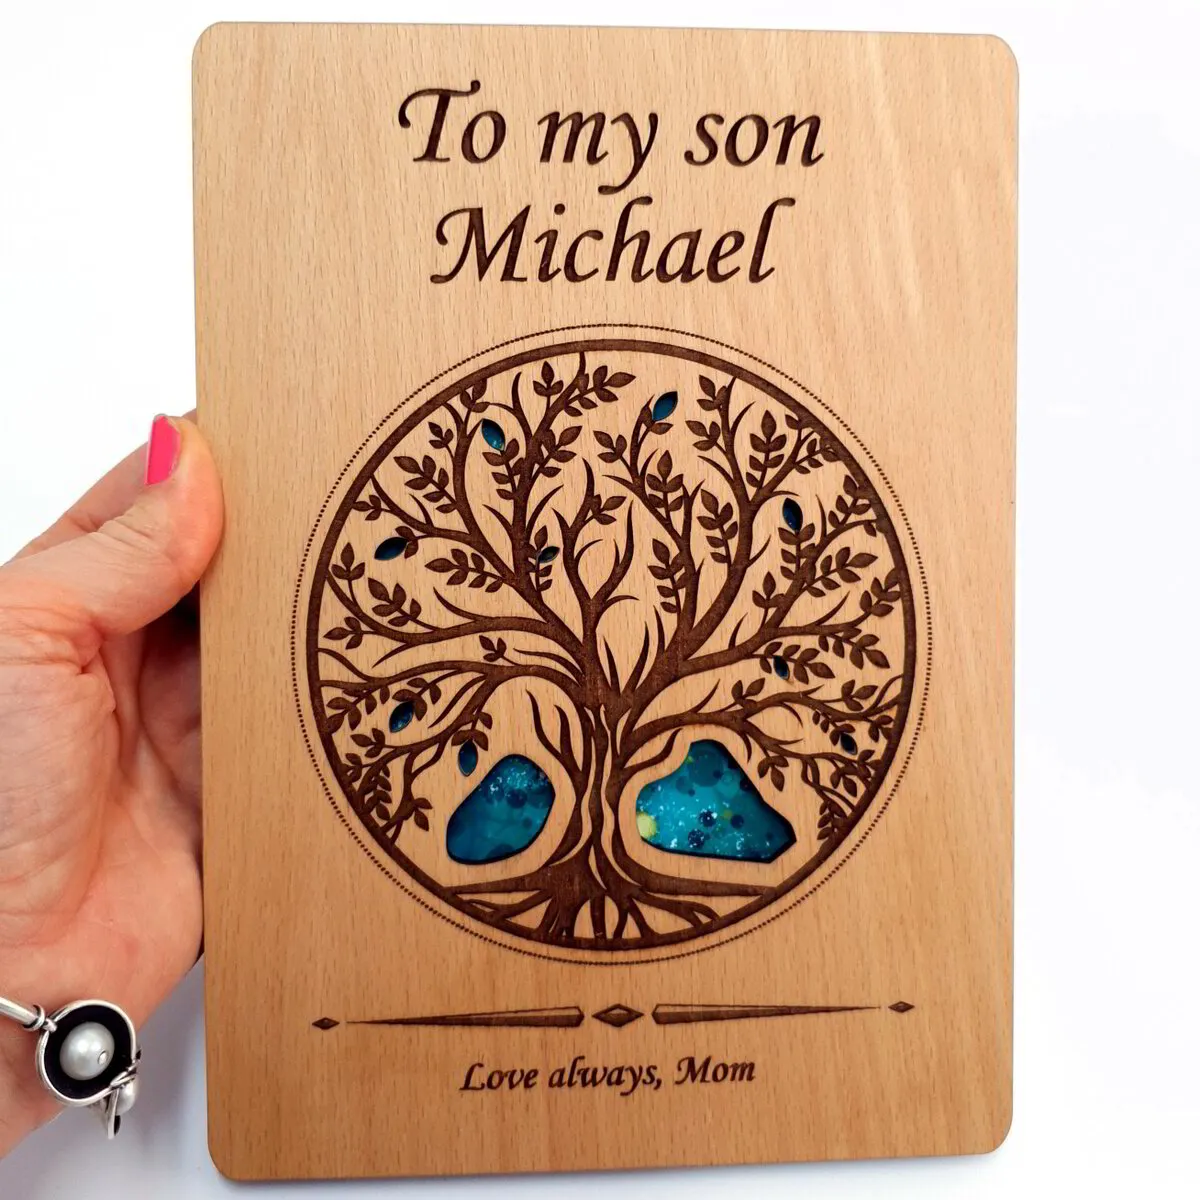 Second Book "To my son"